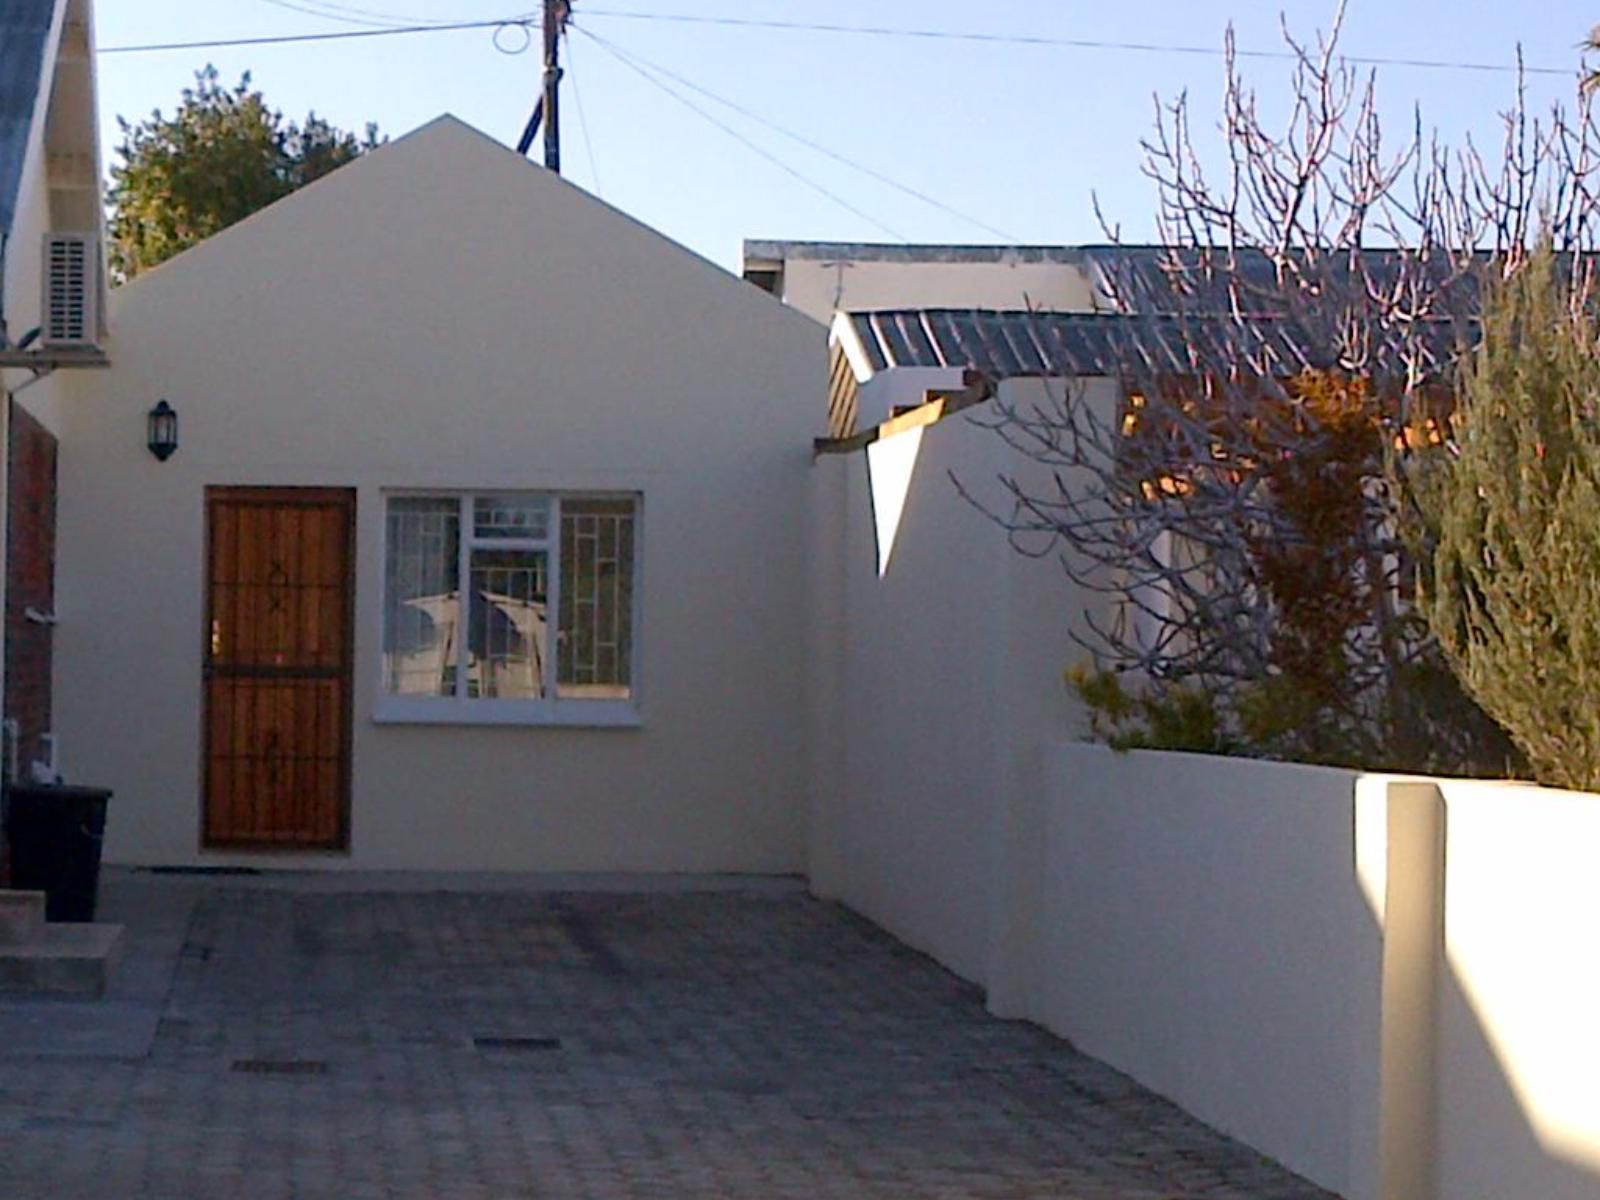 Laings Lodge Laingsburg Western Cape South Africa House, Building, Architecture